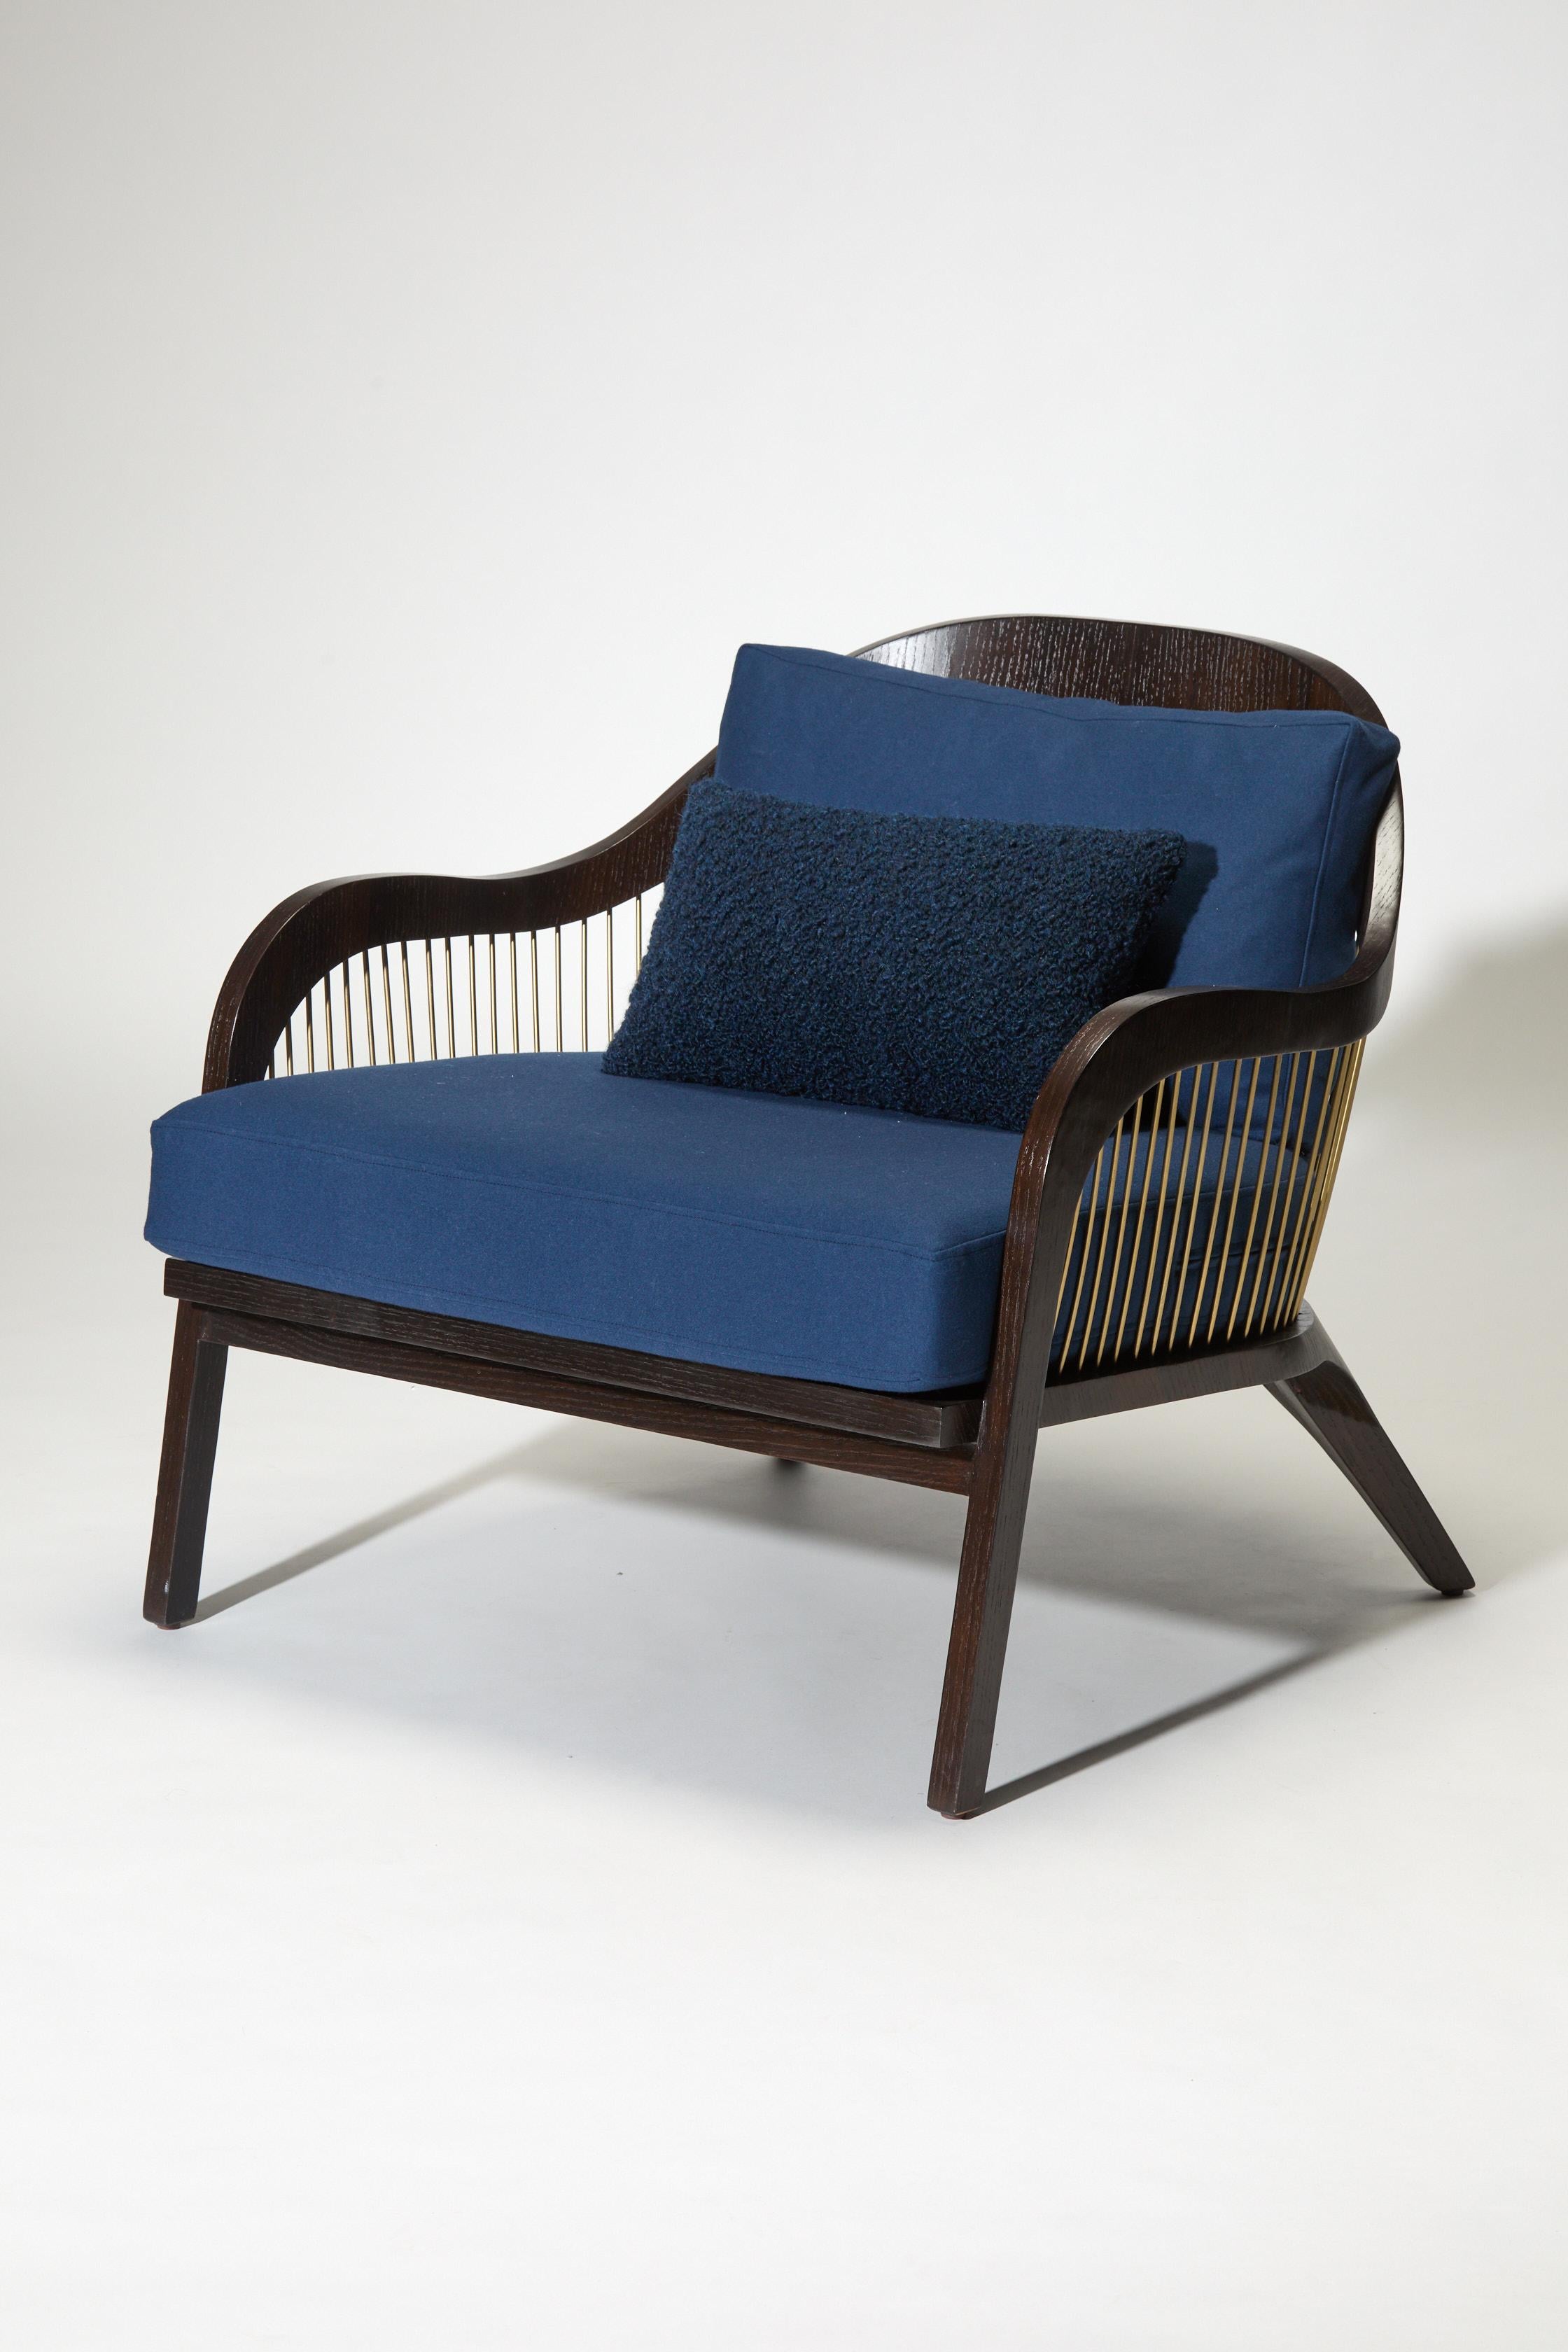 Lanka Armchair, by Reda Amalou Design, 2015 -  Contemporary bergere seat For Sale 1